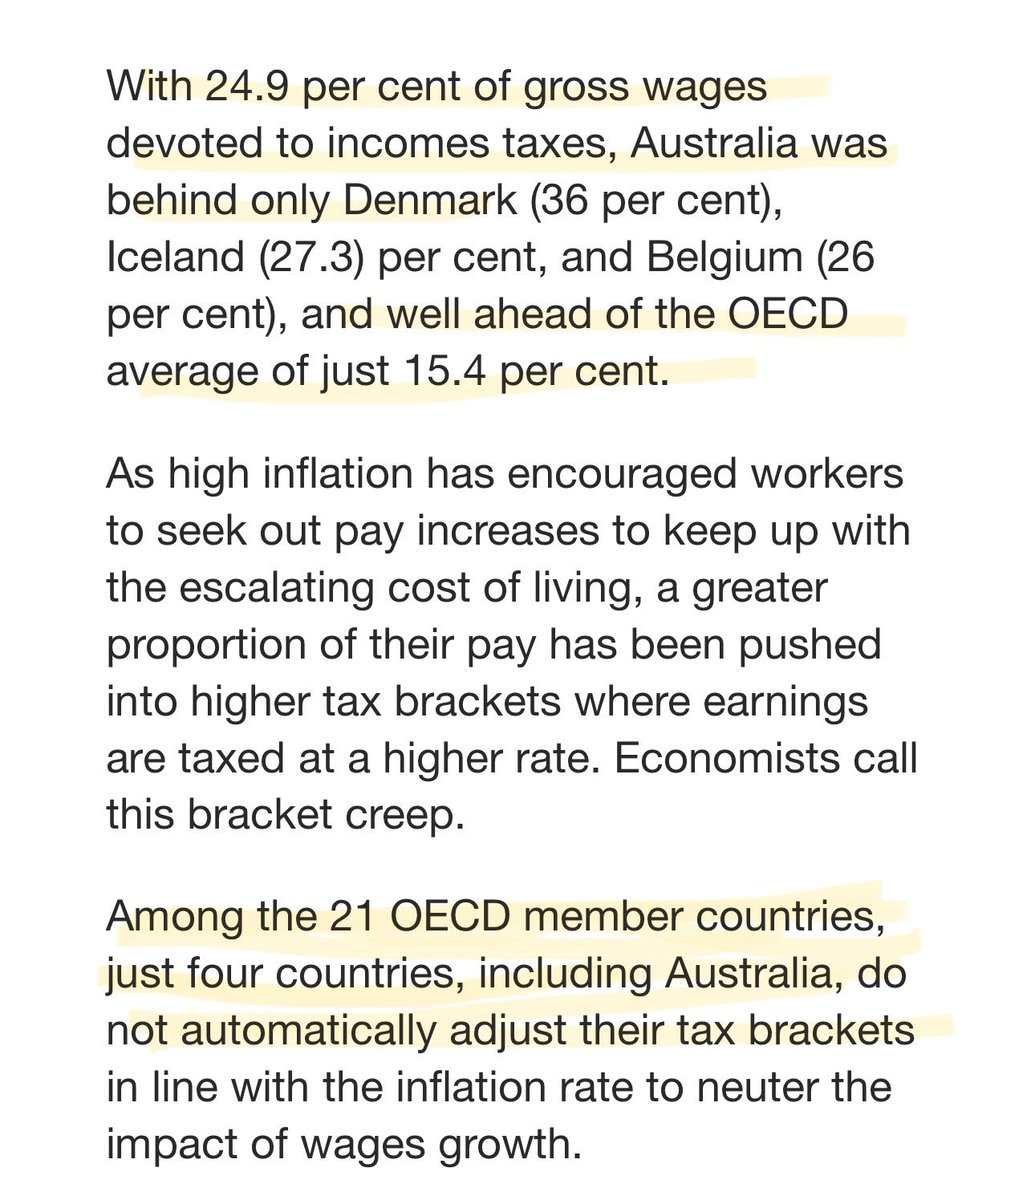 Interesting facts: - One of only 4 OECD countries not indexing brackets - 60% higher tax burden on gross wages v OECD average. - add that to record mining sector tax revenues and Chalmers is swimming in cash.